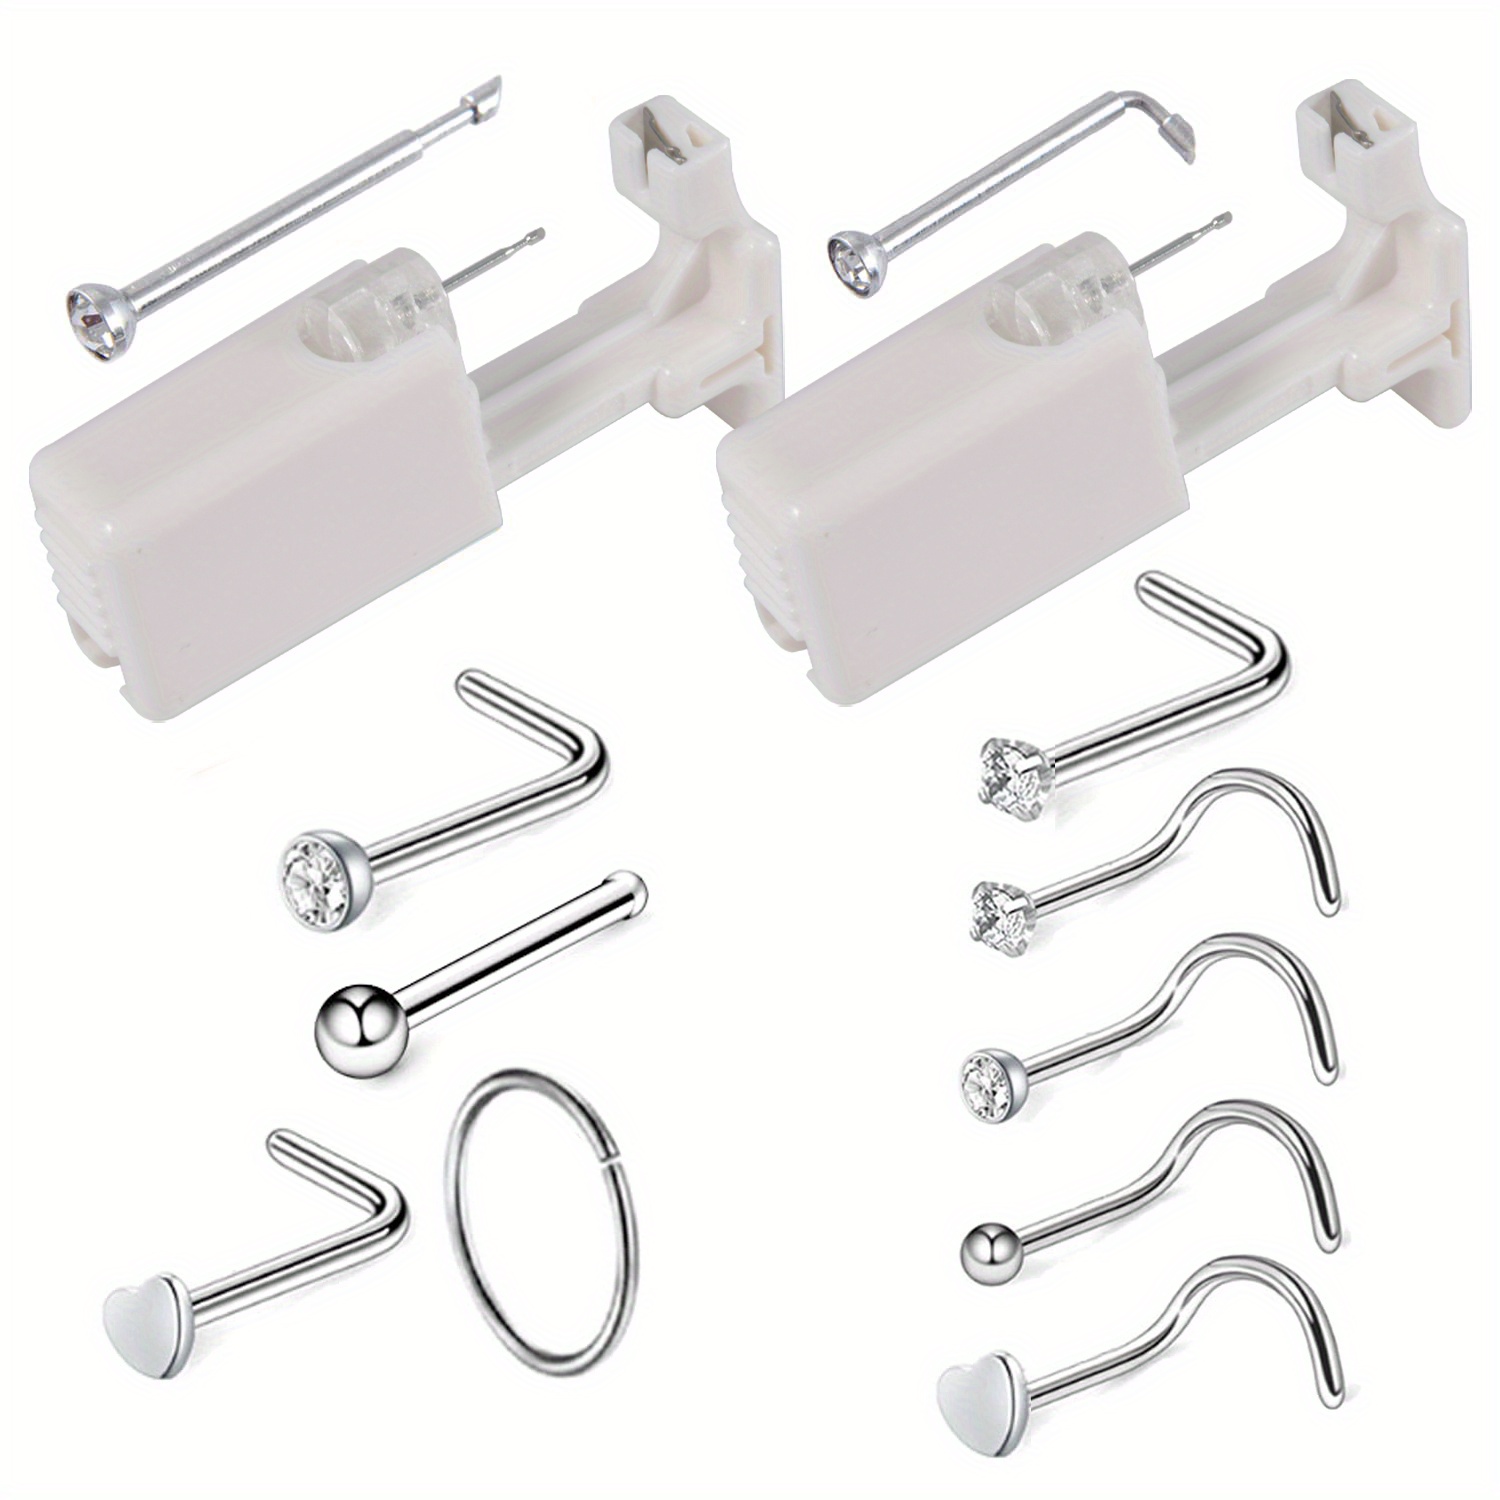 4pc/set Disposable Nose Ear Piercing Kit with 3 Nose Studs No Pain Safety  Body Piercer Tool